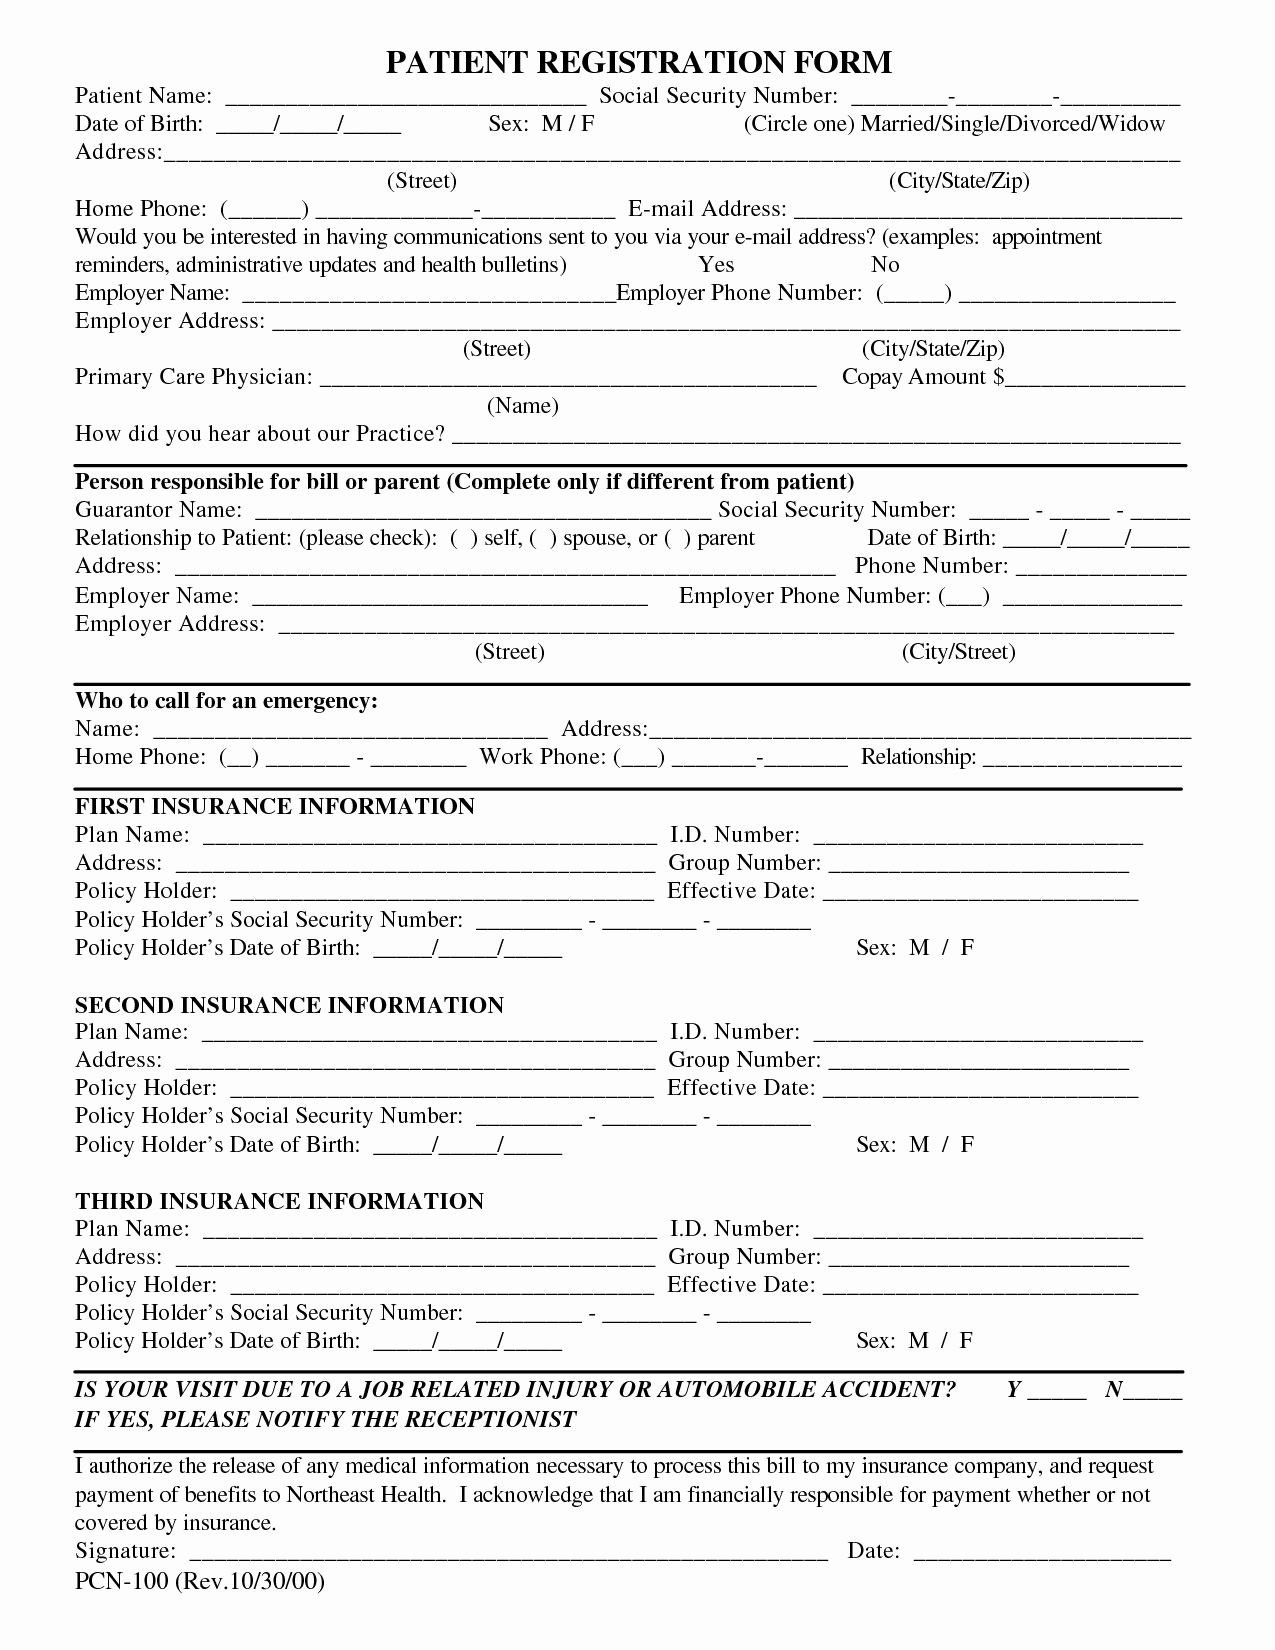 Patient Information form Template New Free Patient Registration form Template